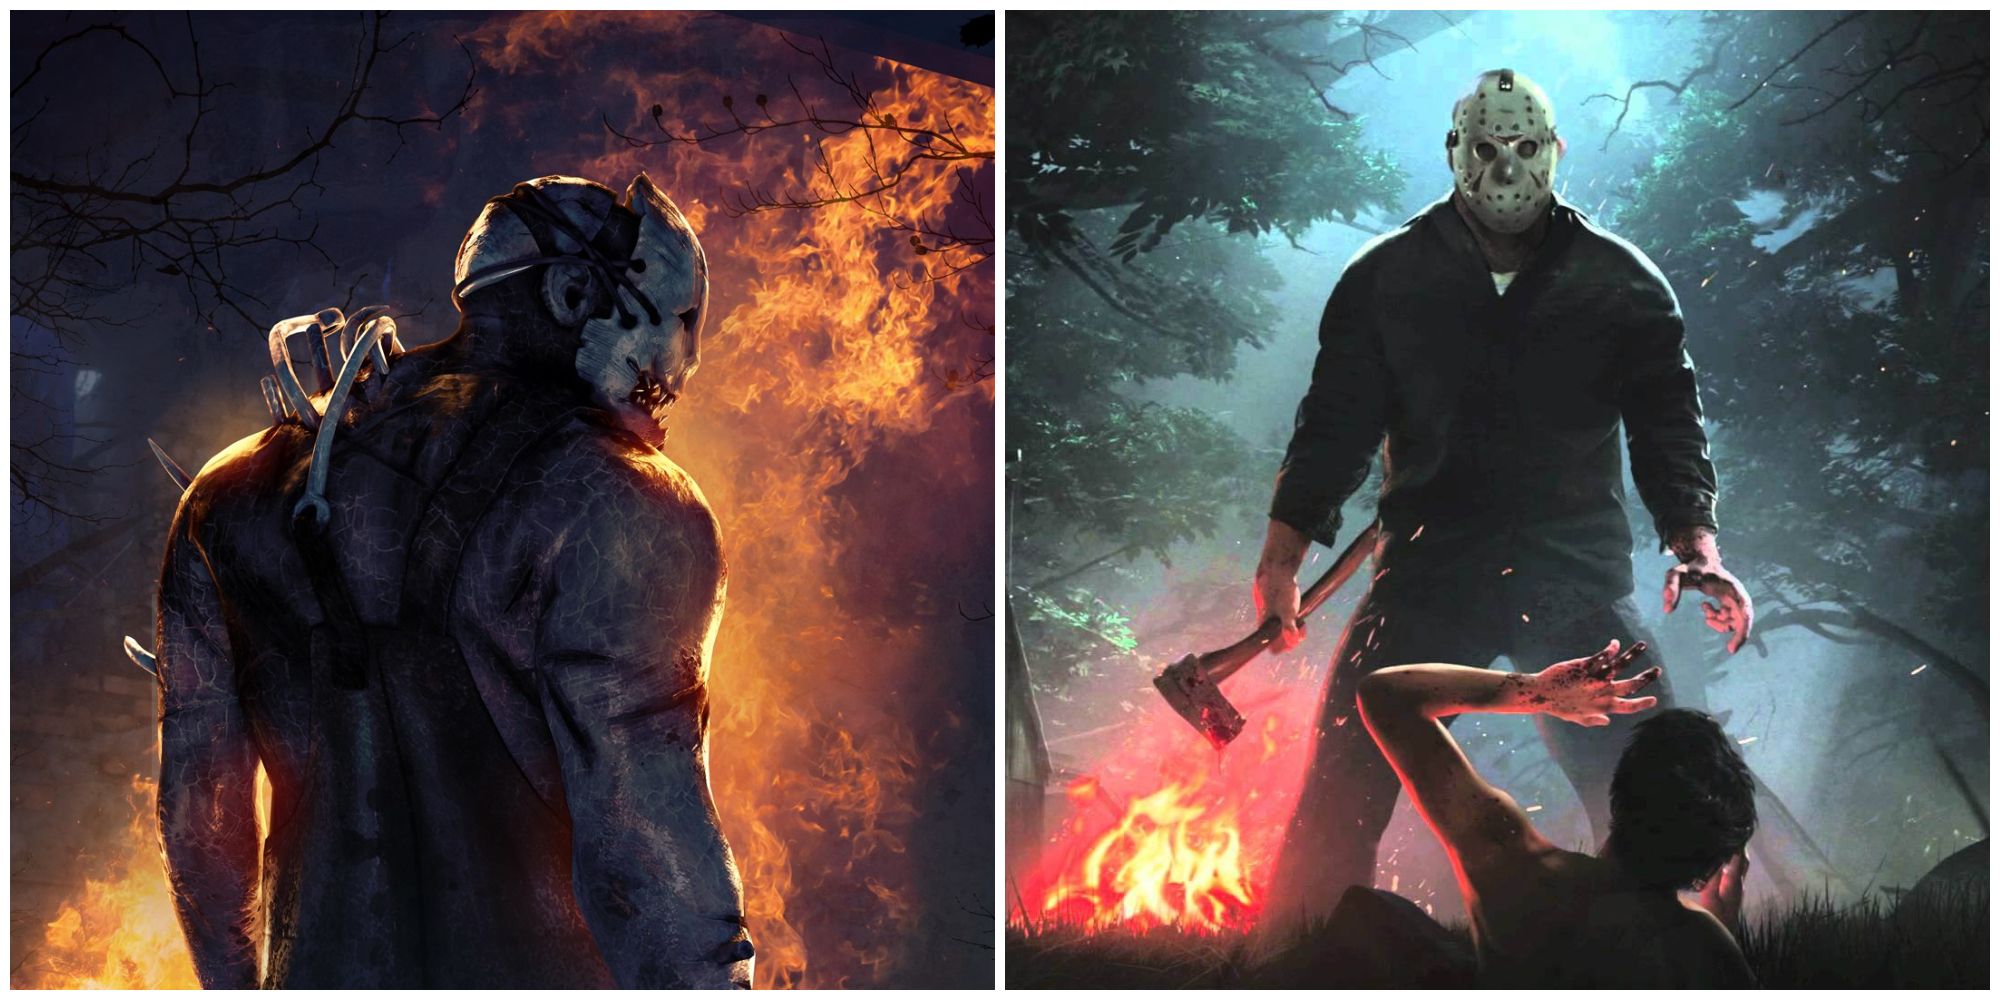 Dead By Daylight Vs Friday The 13th Which Slasher Game Is Better